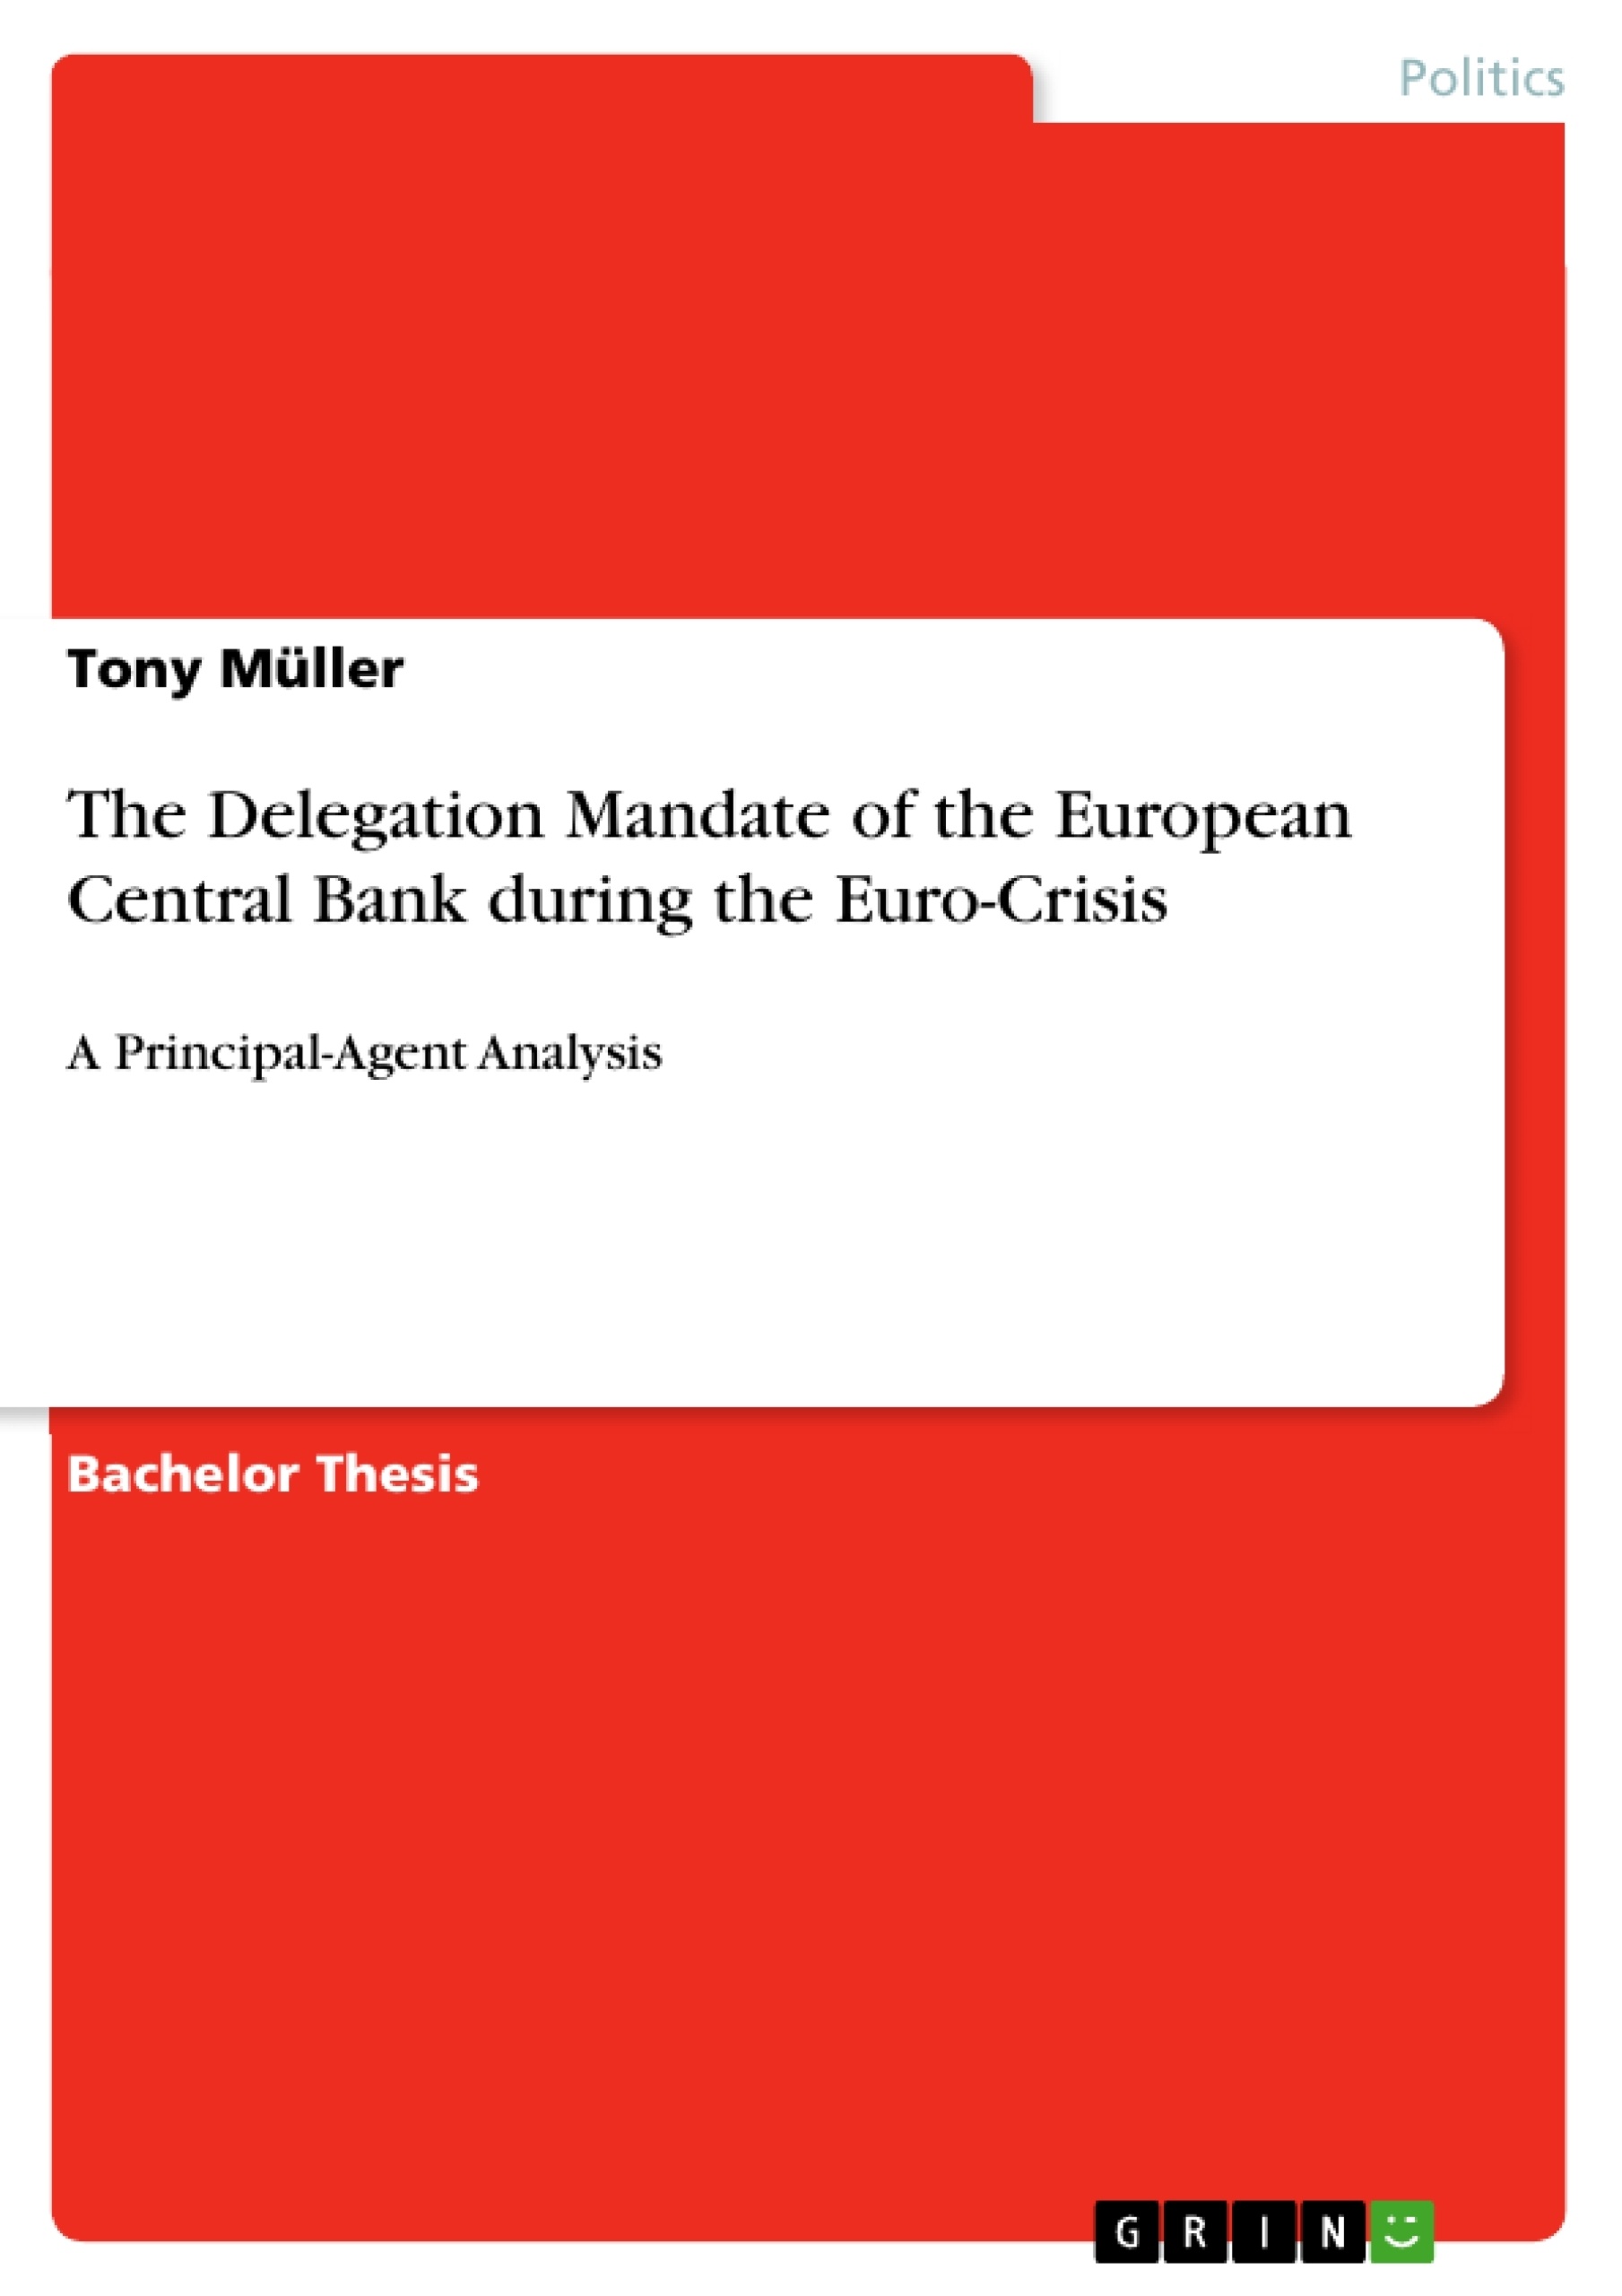 Title: The Delegation Mandate of the European Central Bank during the Euro-Crisis